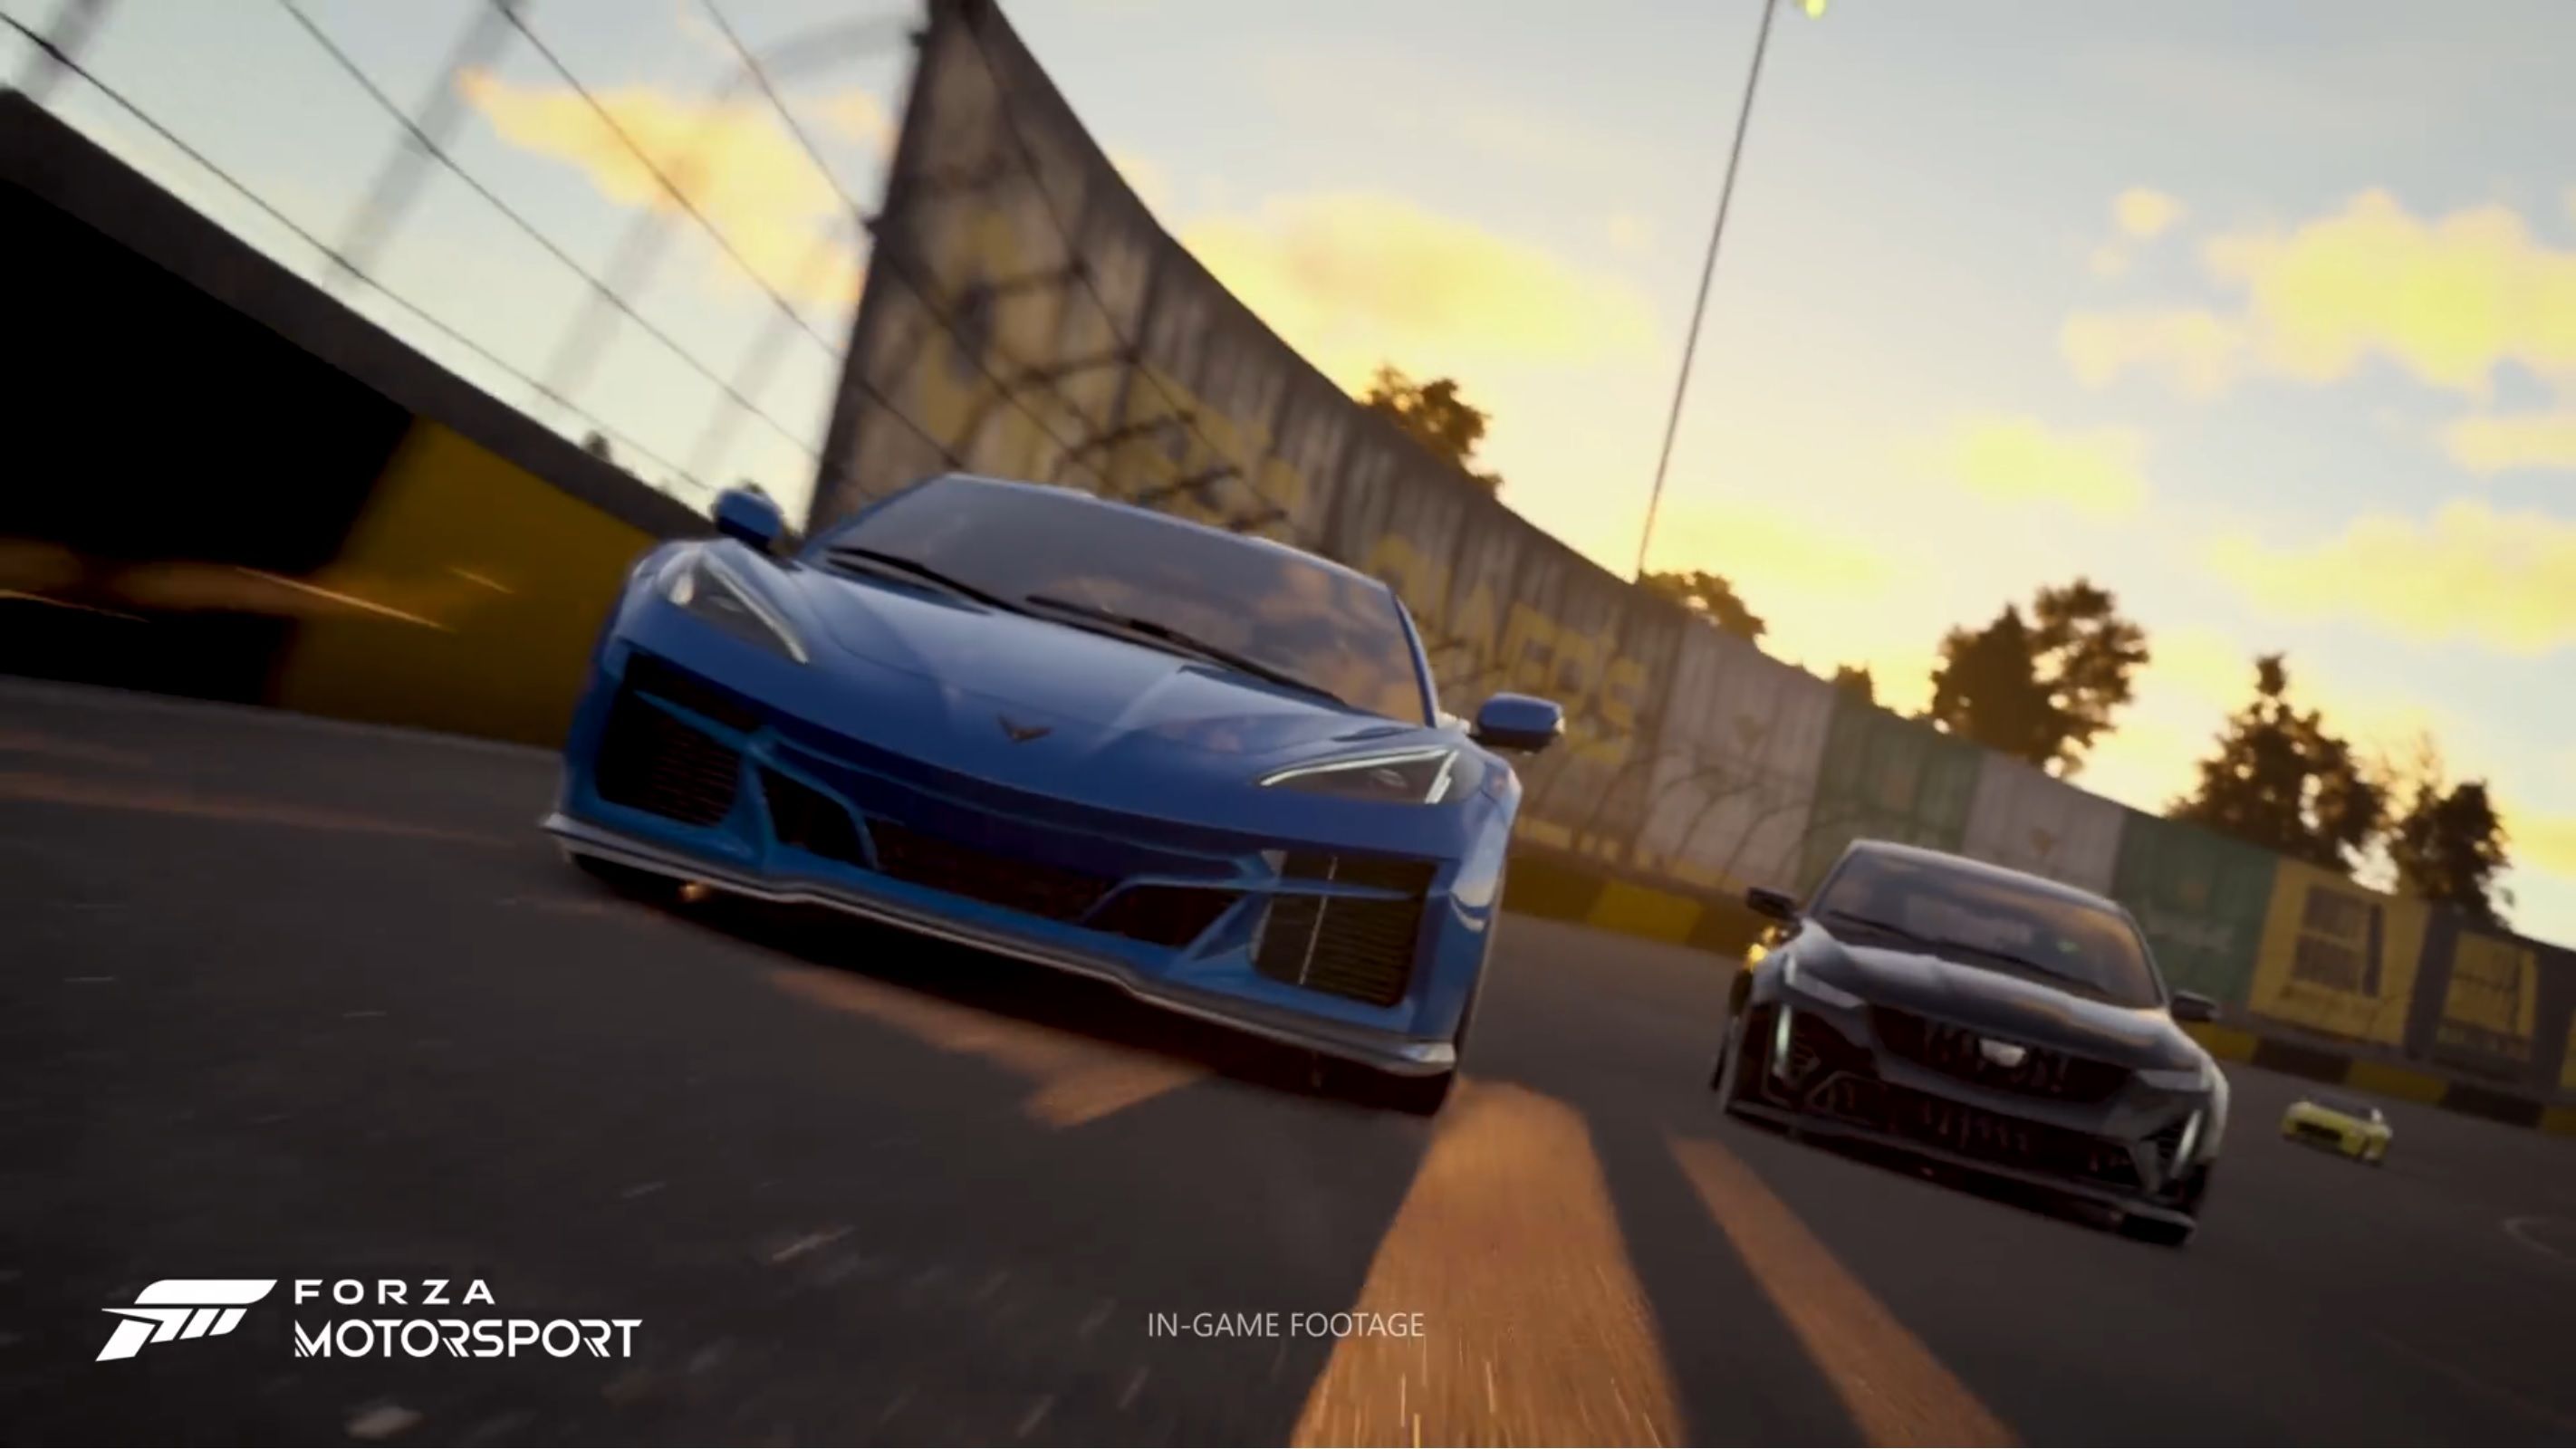 Forza Motorsport Coming October 10 to Xbox Series X